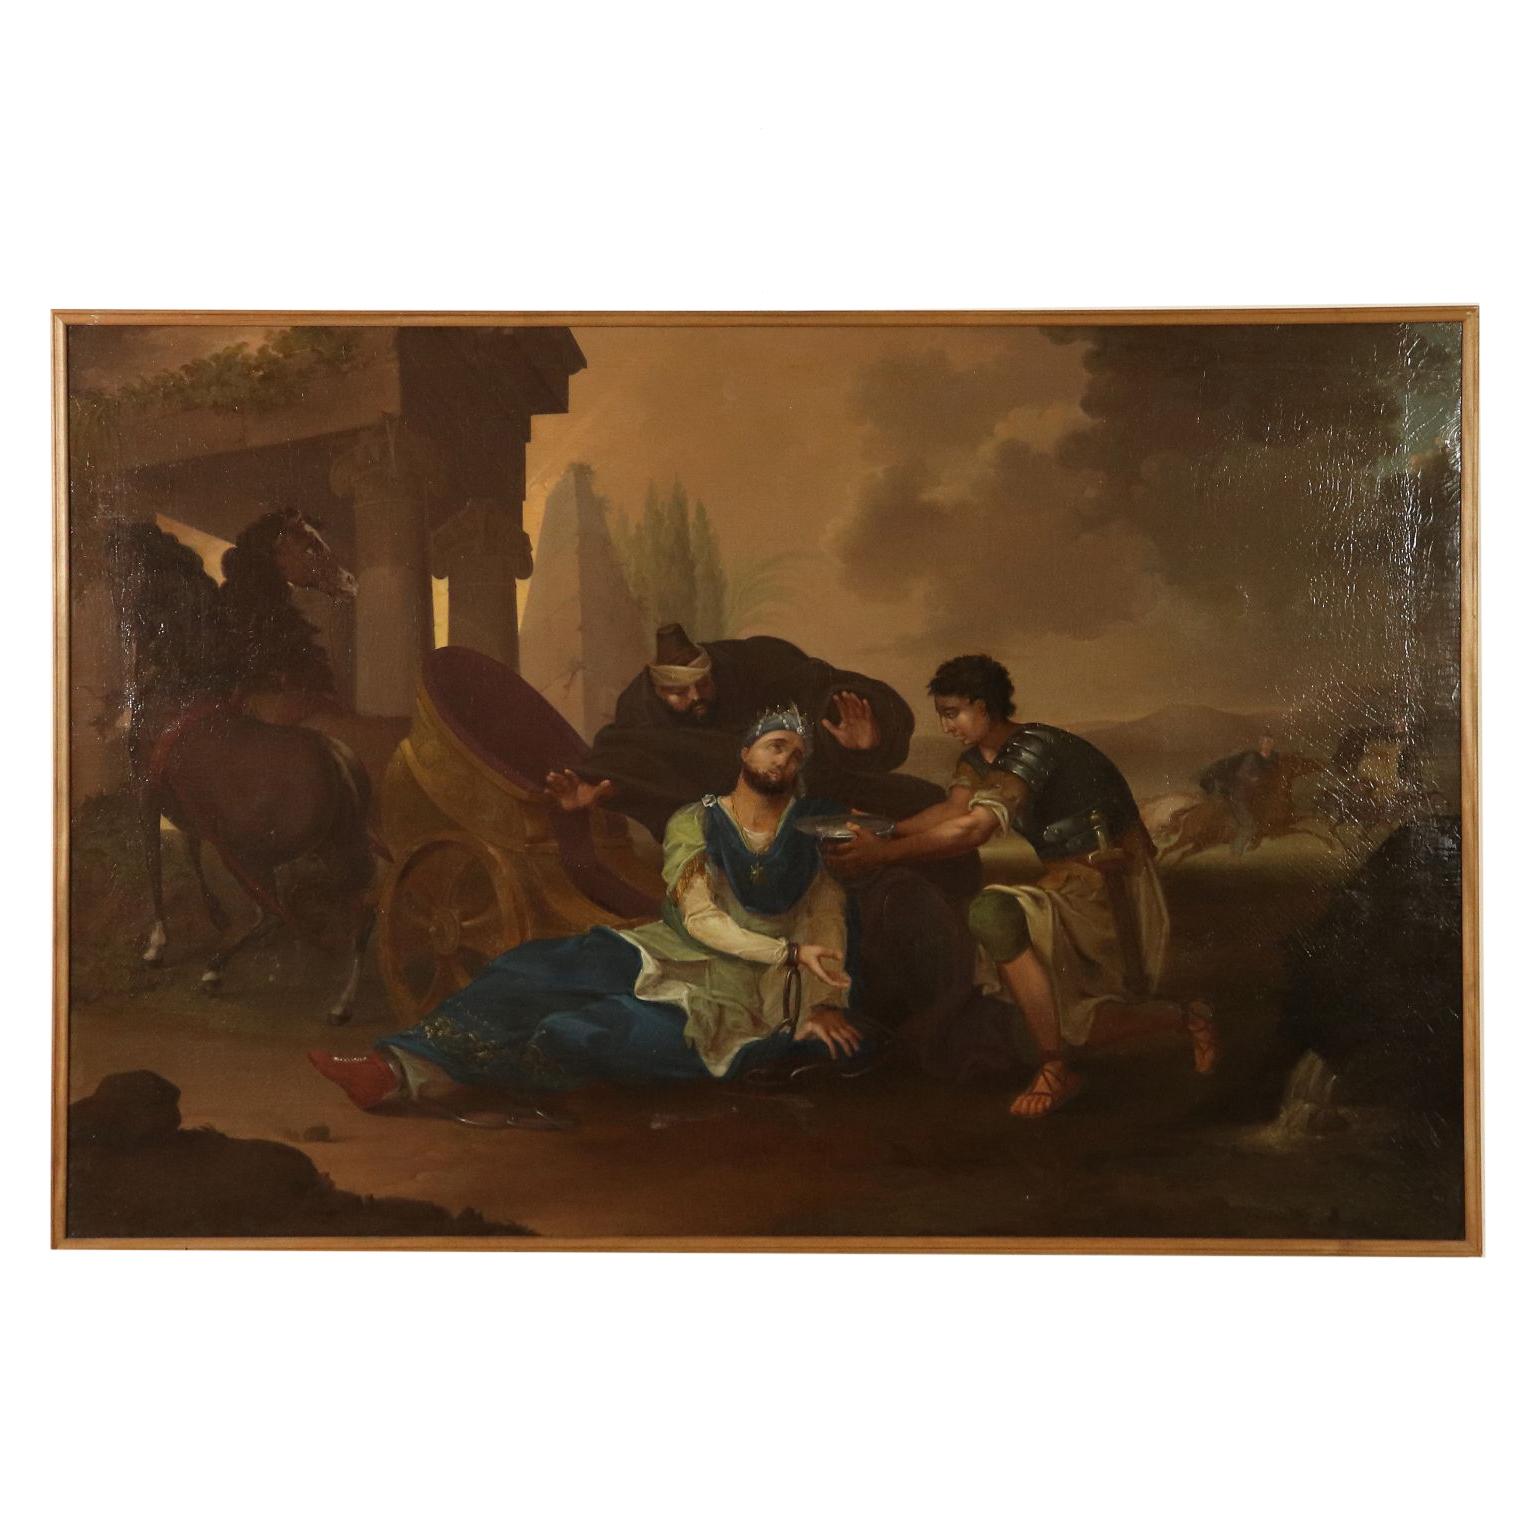 Unknown Landscape Painting - King Darius' Death Oil on Canvas Late 1800s Italian Painting